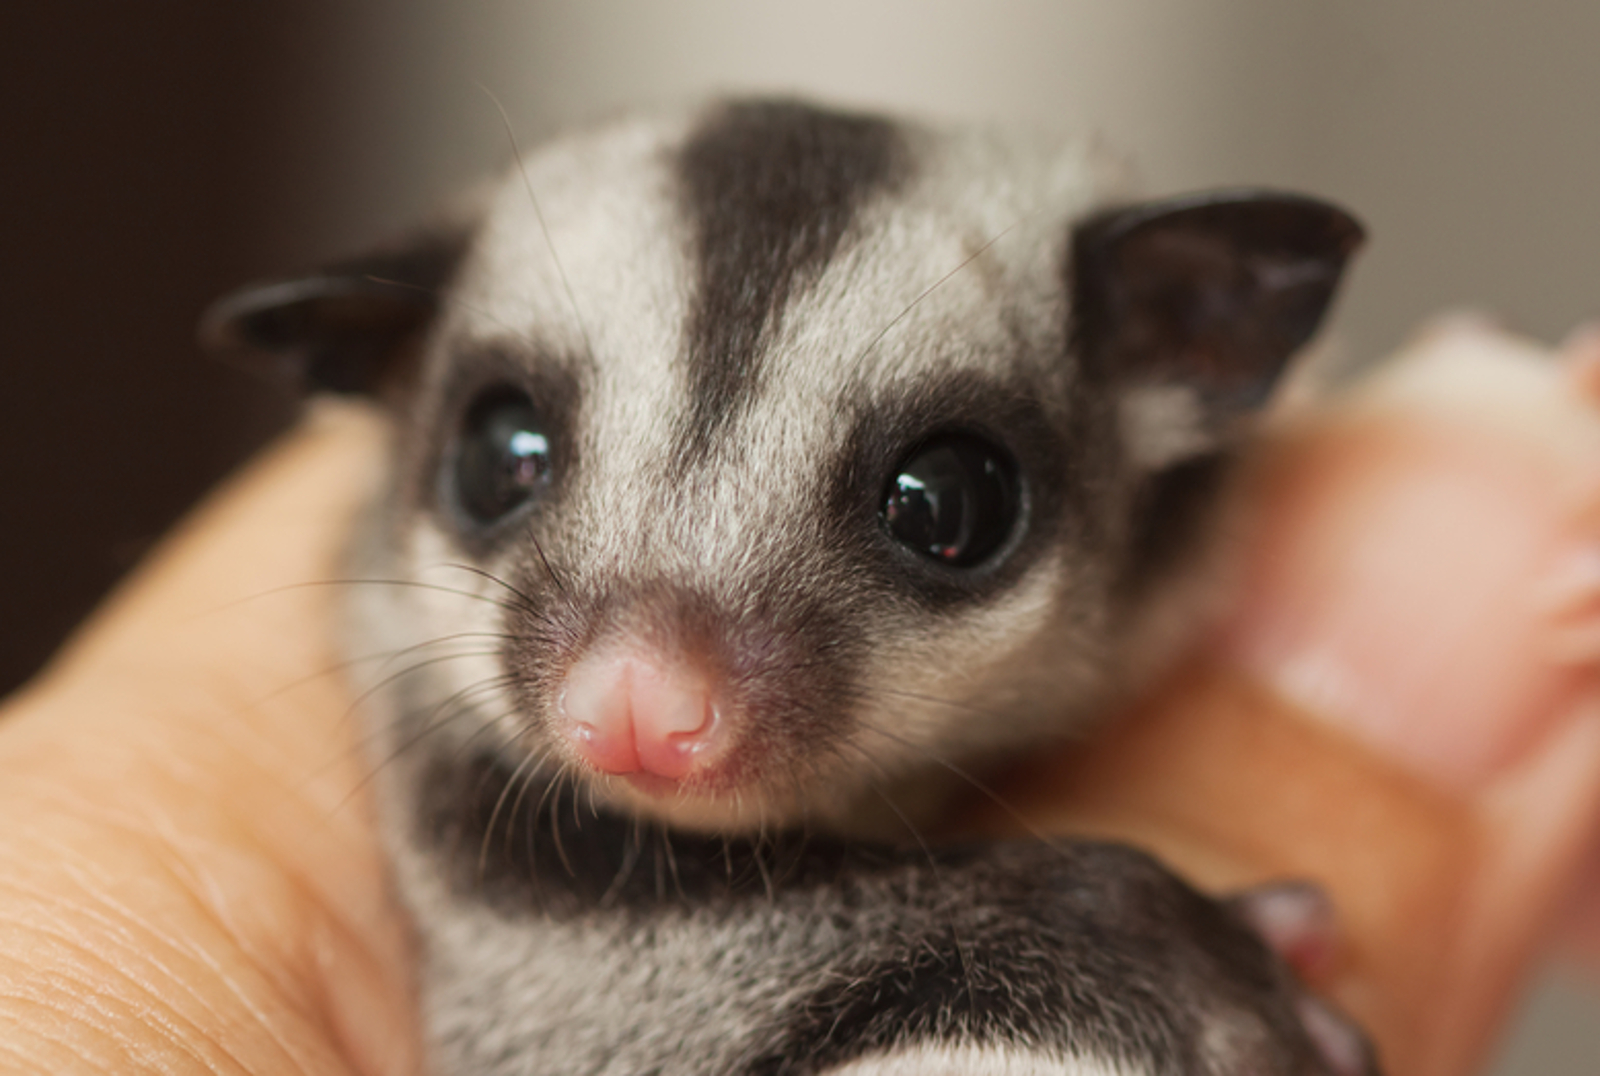 How Our Obsession with Pocket Pets Fuels the Exotic Pet Trade